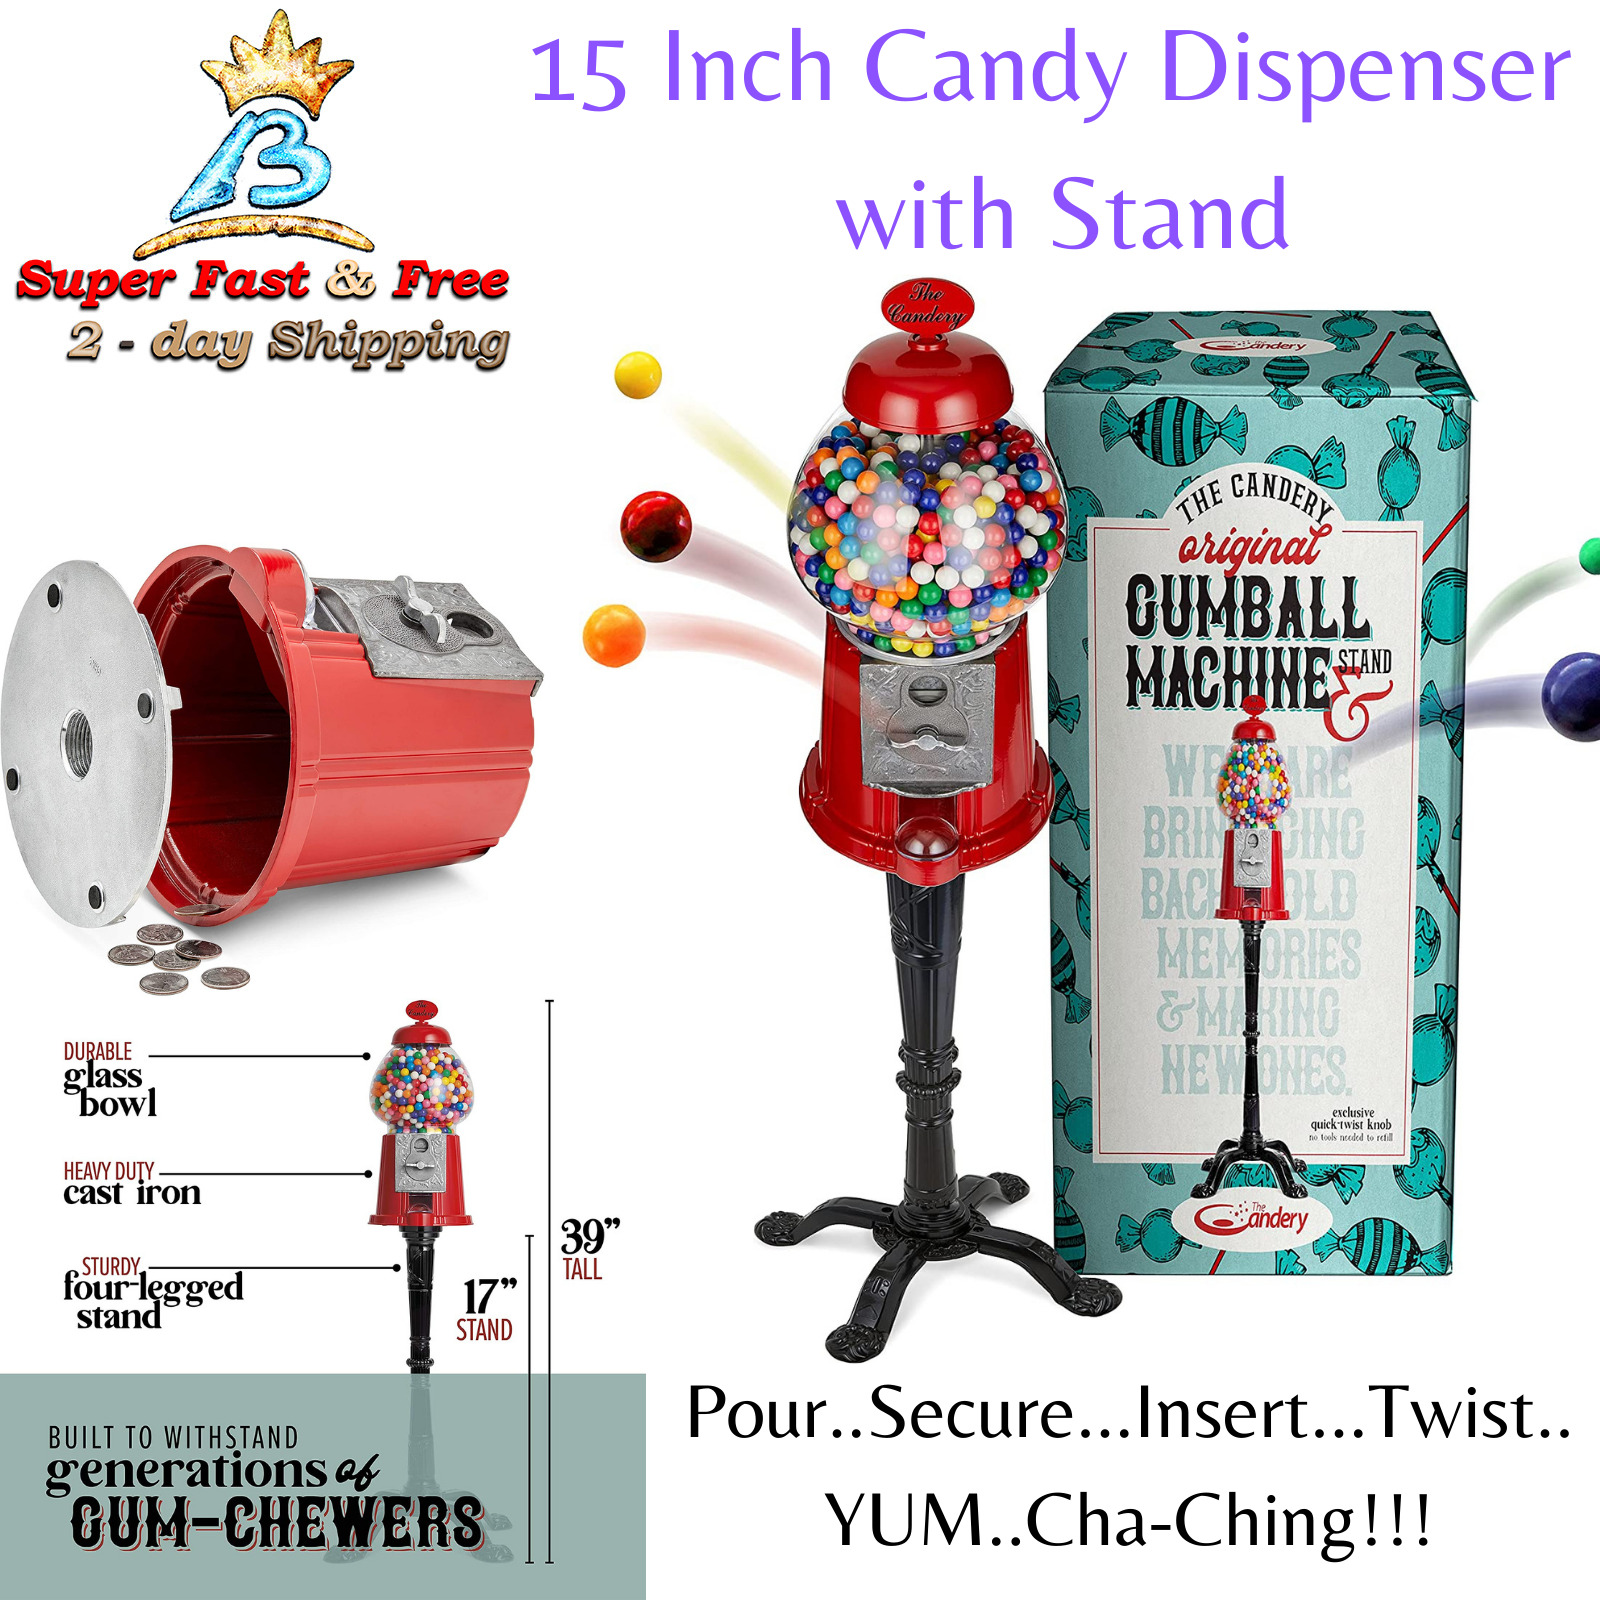 Classic Candy Dispenser With Stand Easy Twist-Off Refill Free or Coin Operated  